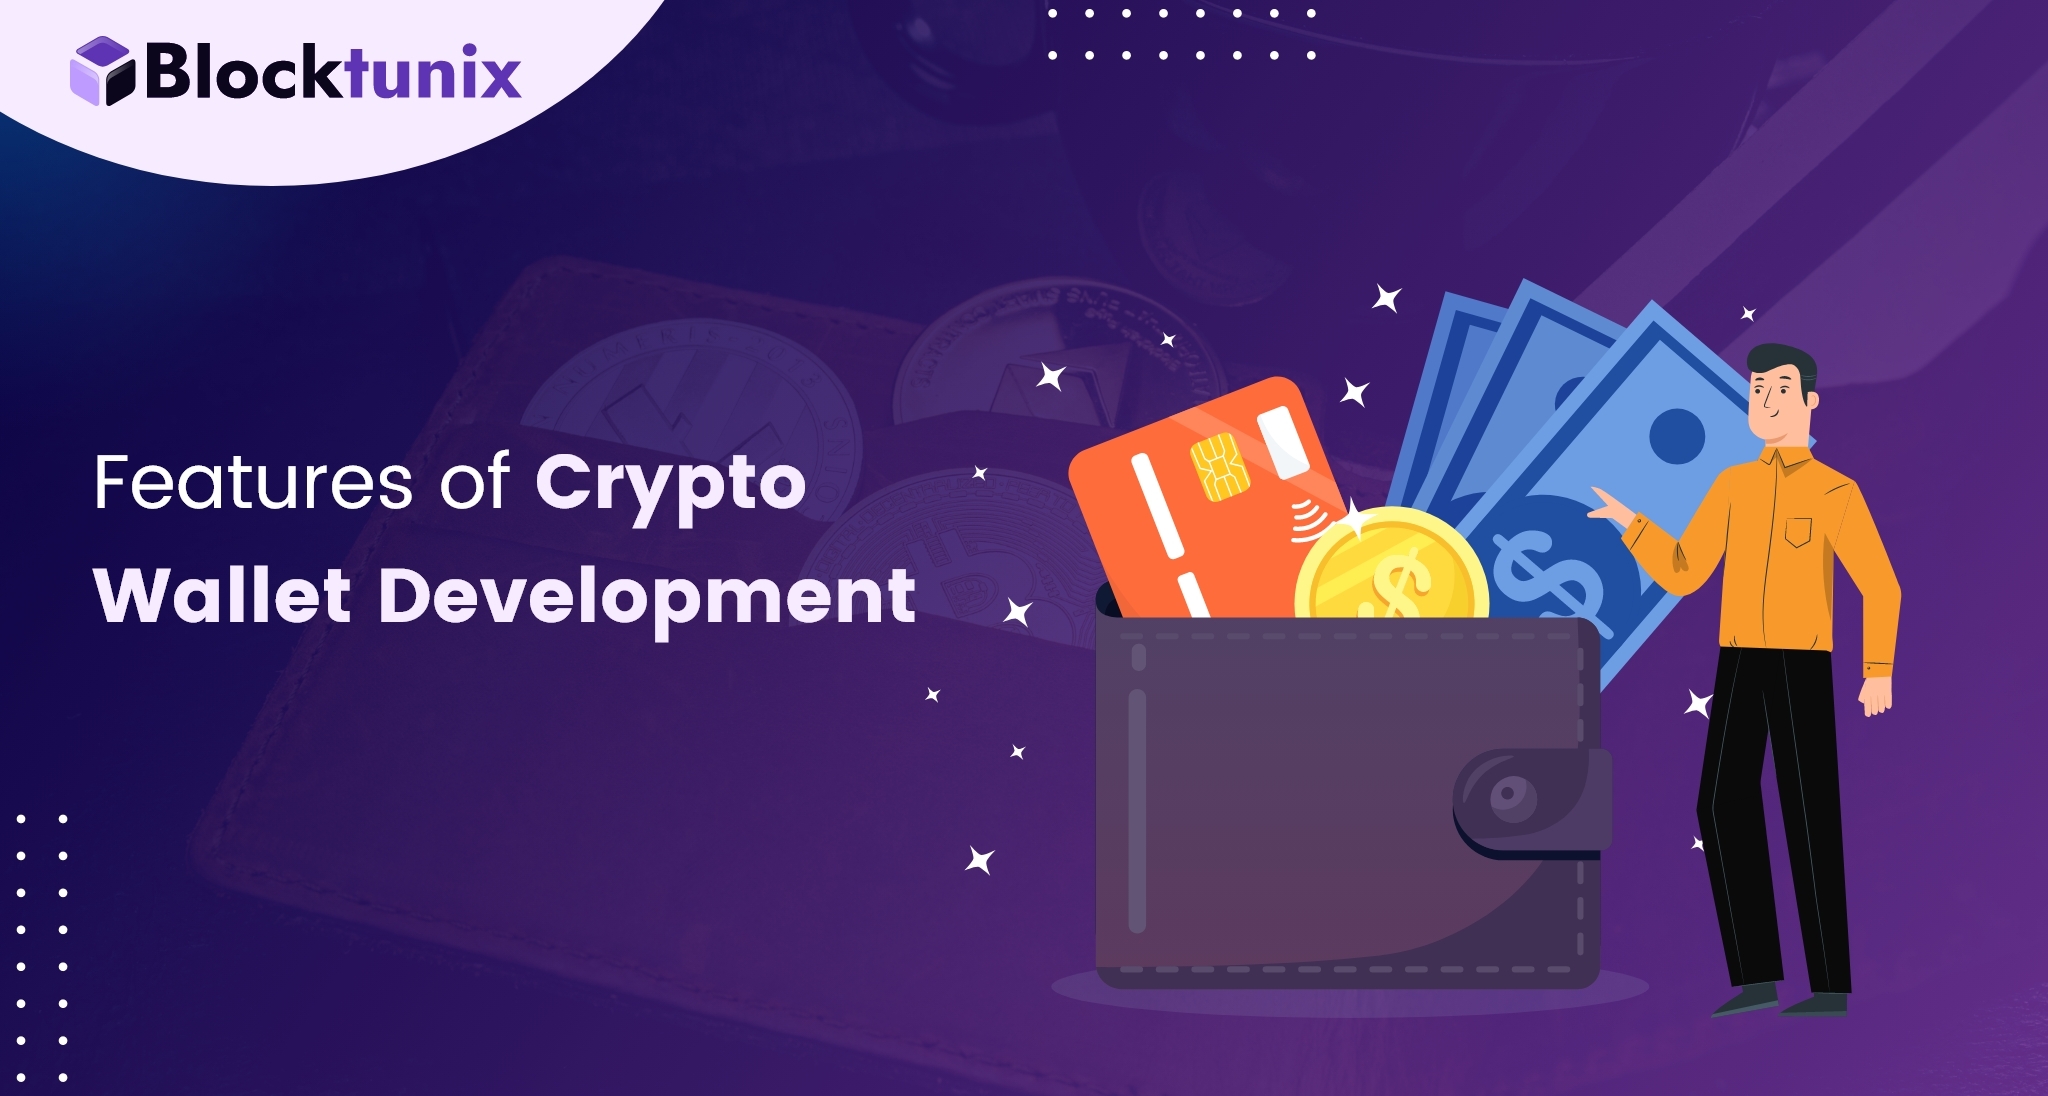 Features of Crypto Wallet